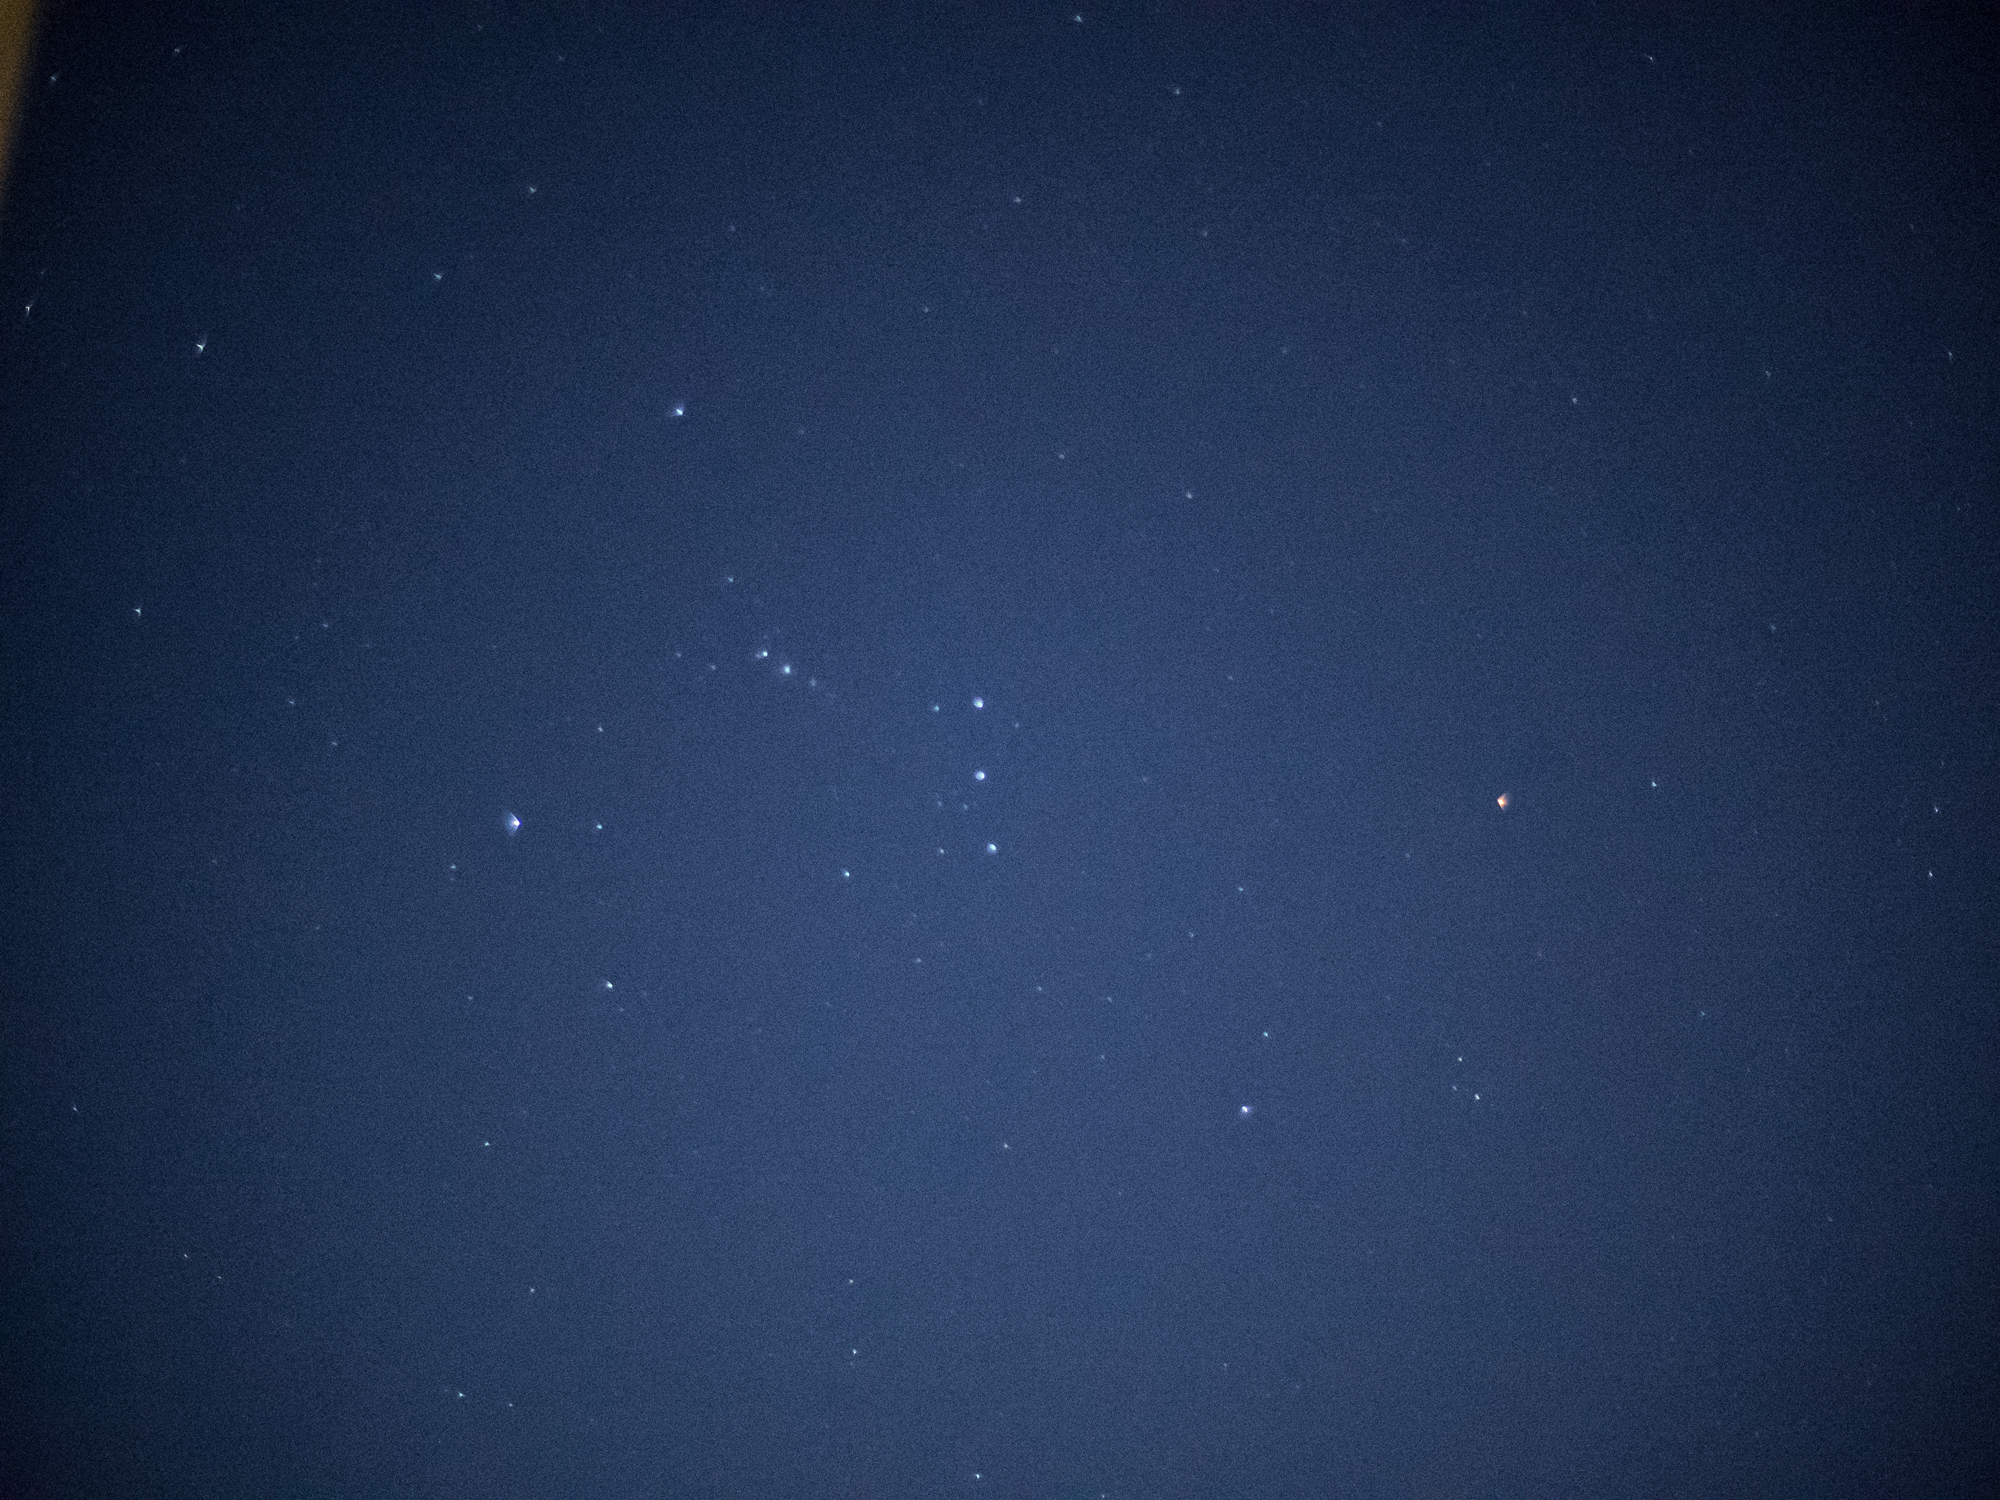 The familiar Orion constellation.. soon to be visited